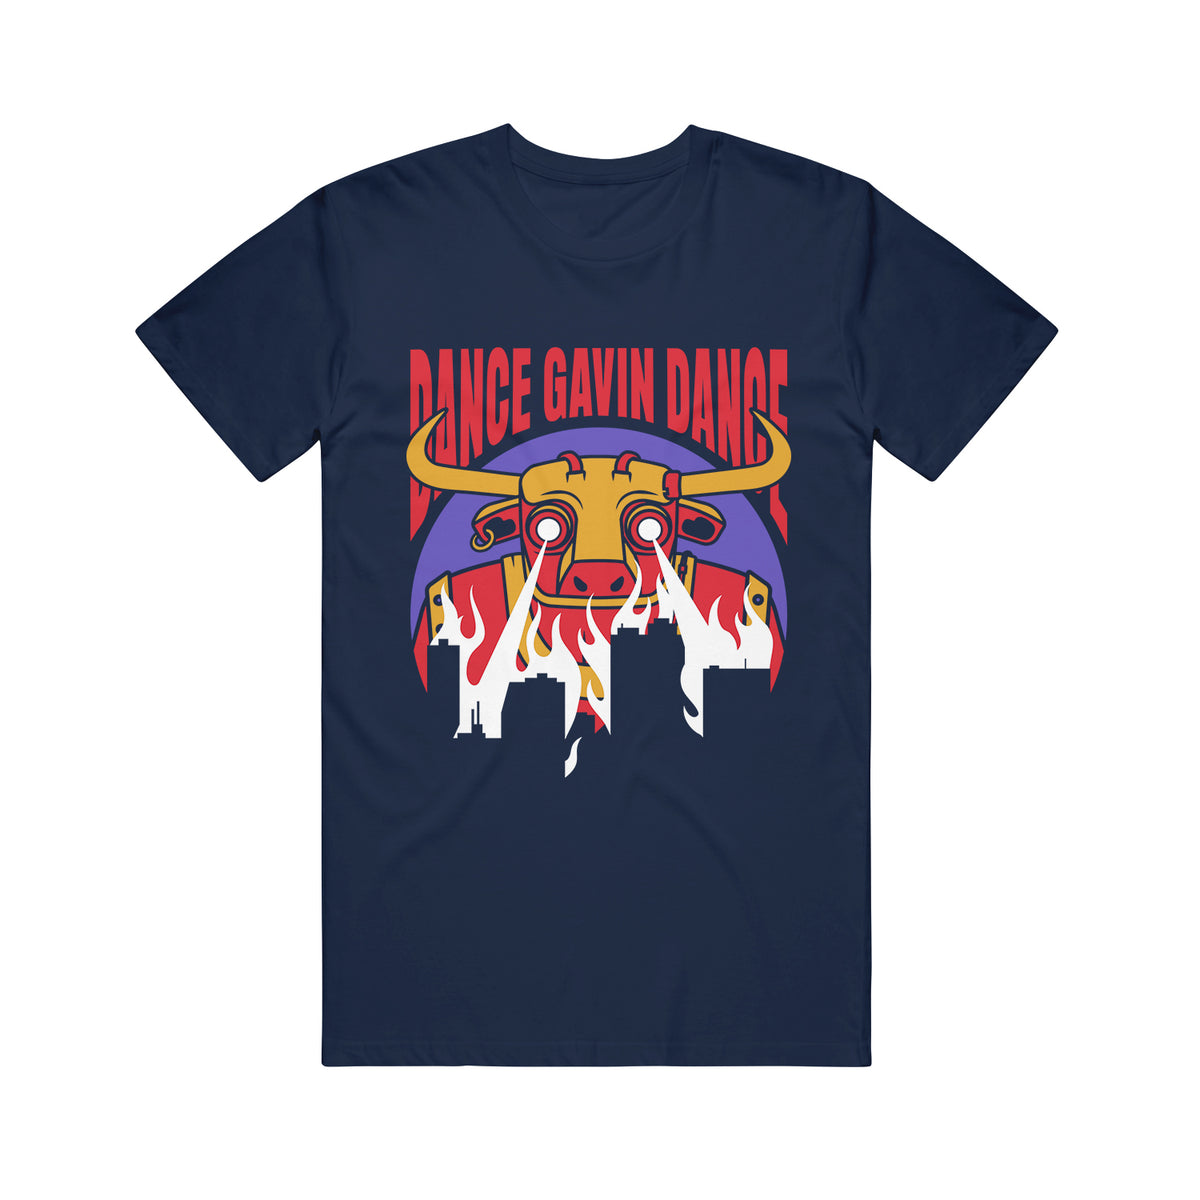 navy tee shirt on white background that has red dance gavin dance on top full chest and a robot bull below with white lasers shooting from the eyes.